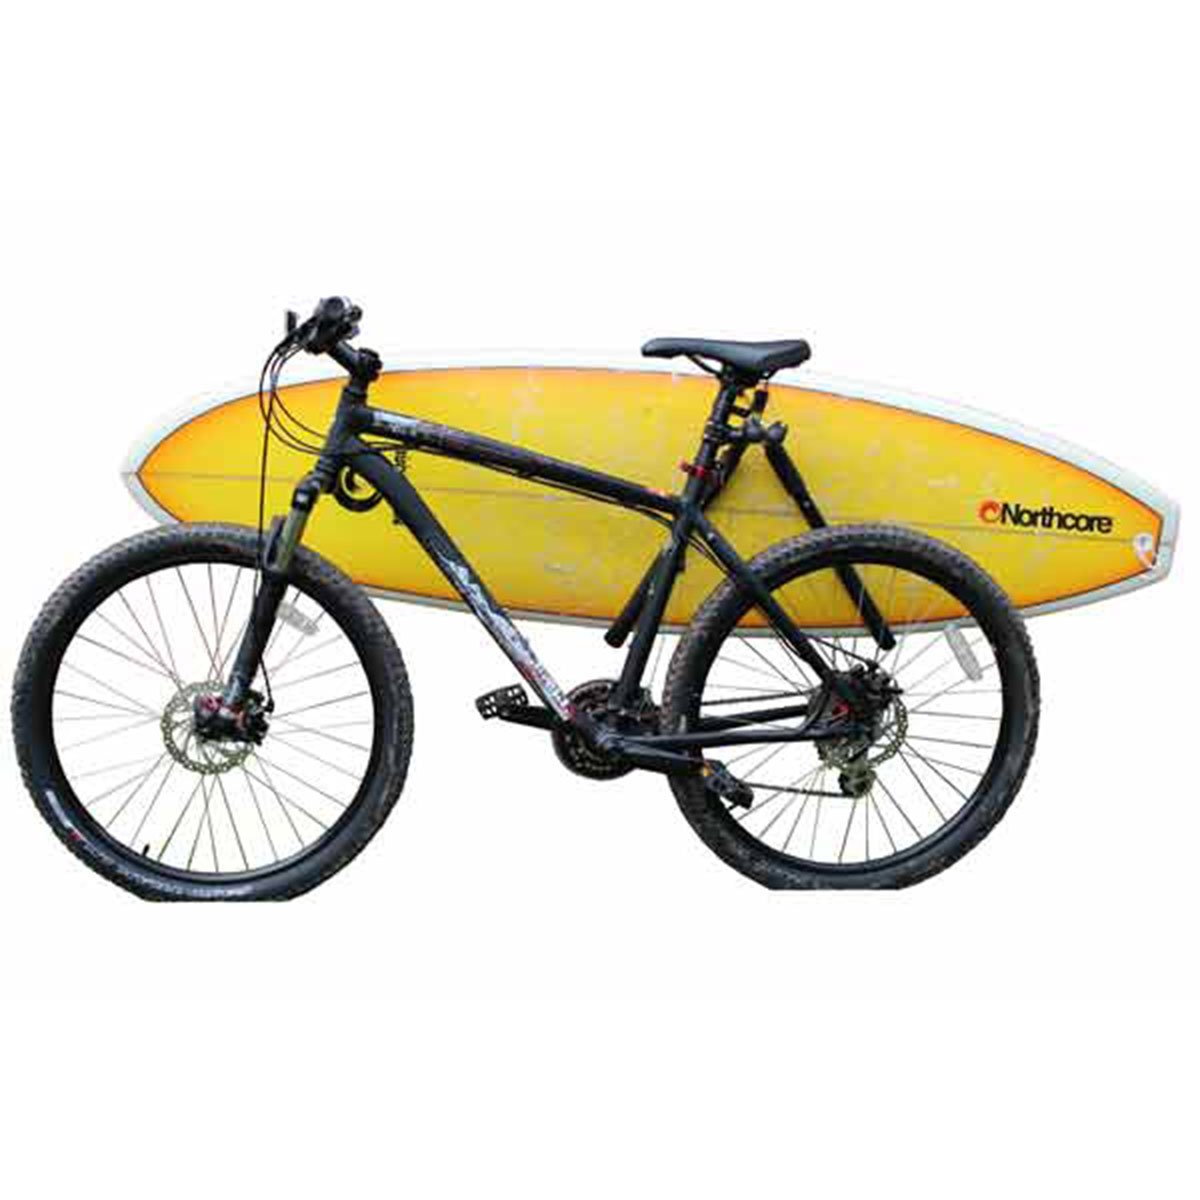 Northcore "Lowrider" Bicycle Surfboard Carry Rack